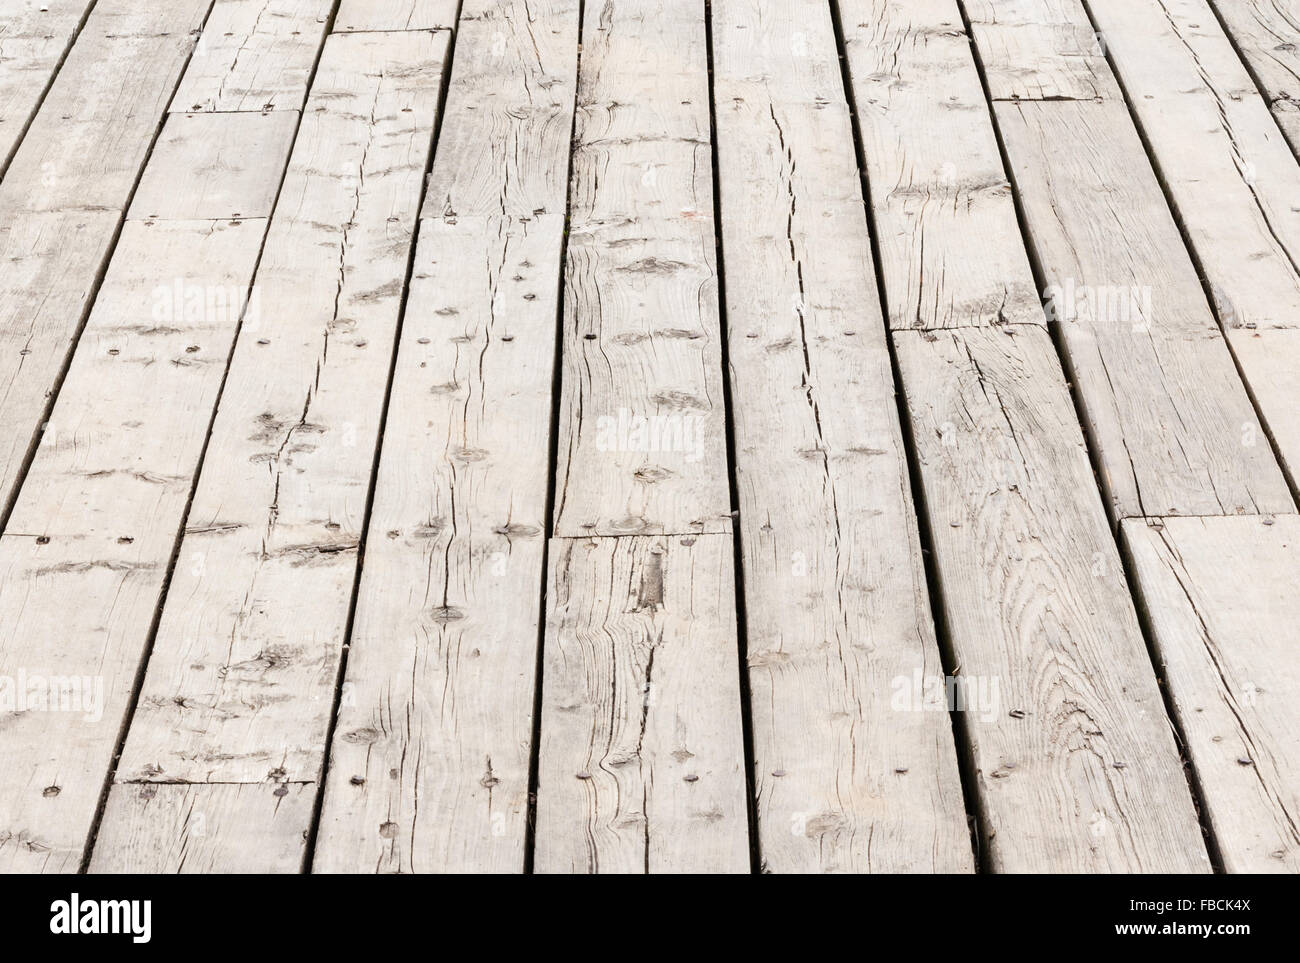 Cracked weathered gray wooden deck surface boards in perspective. Stock Photo